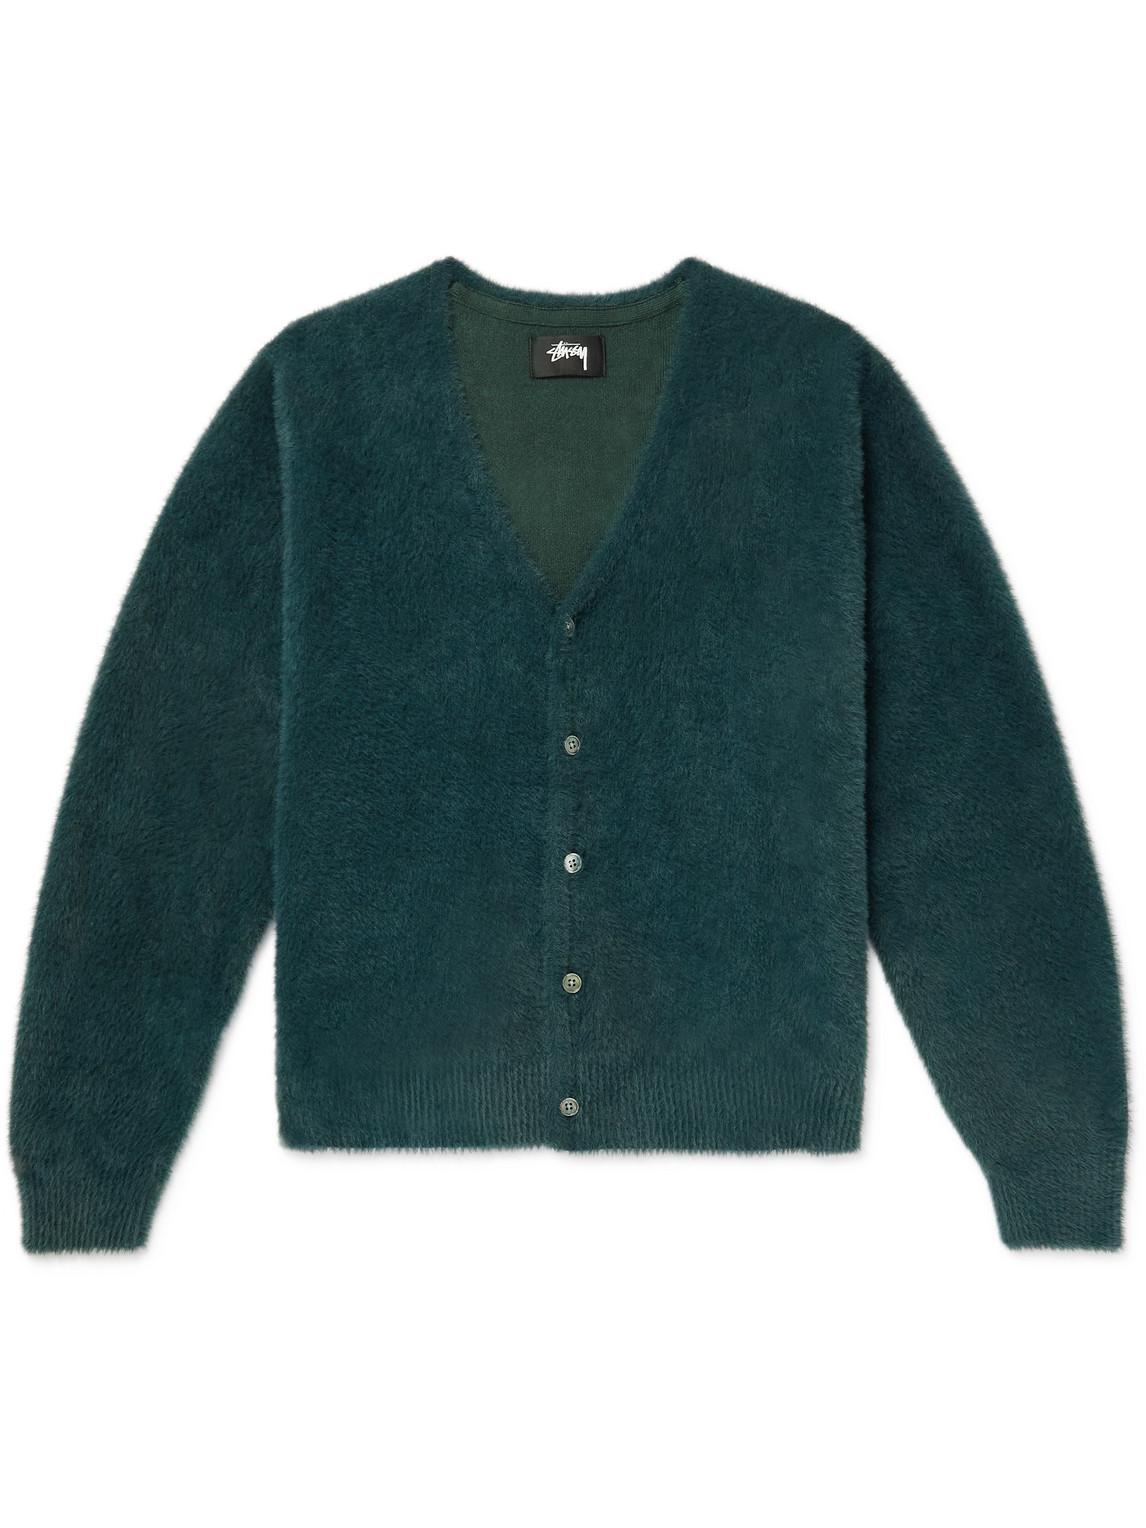 Stussy Shaggy Brushed Knitted Cardigan in Green for Men | Lyst